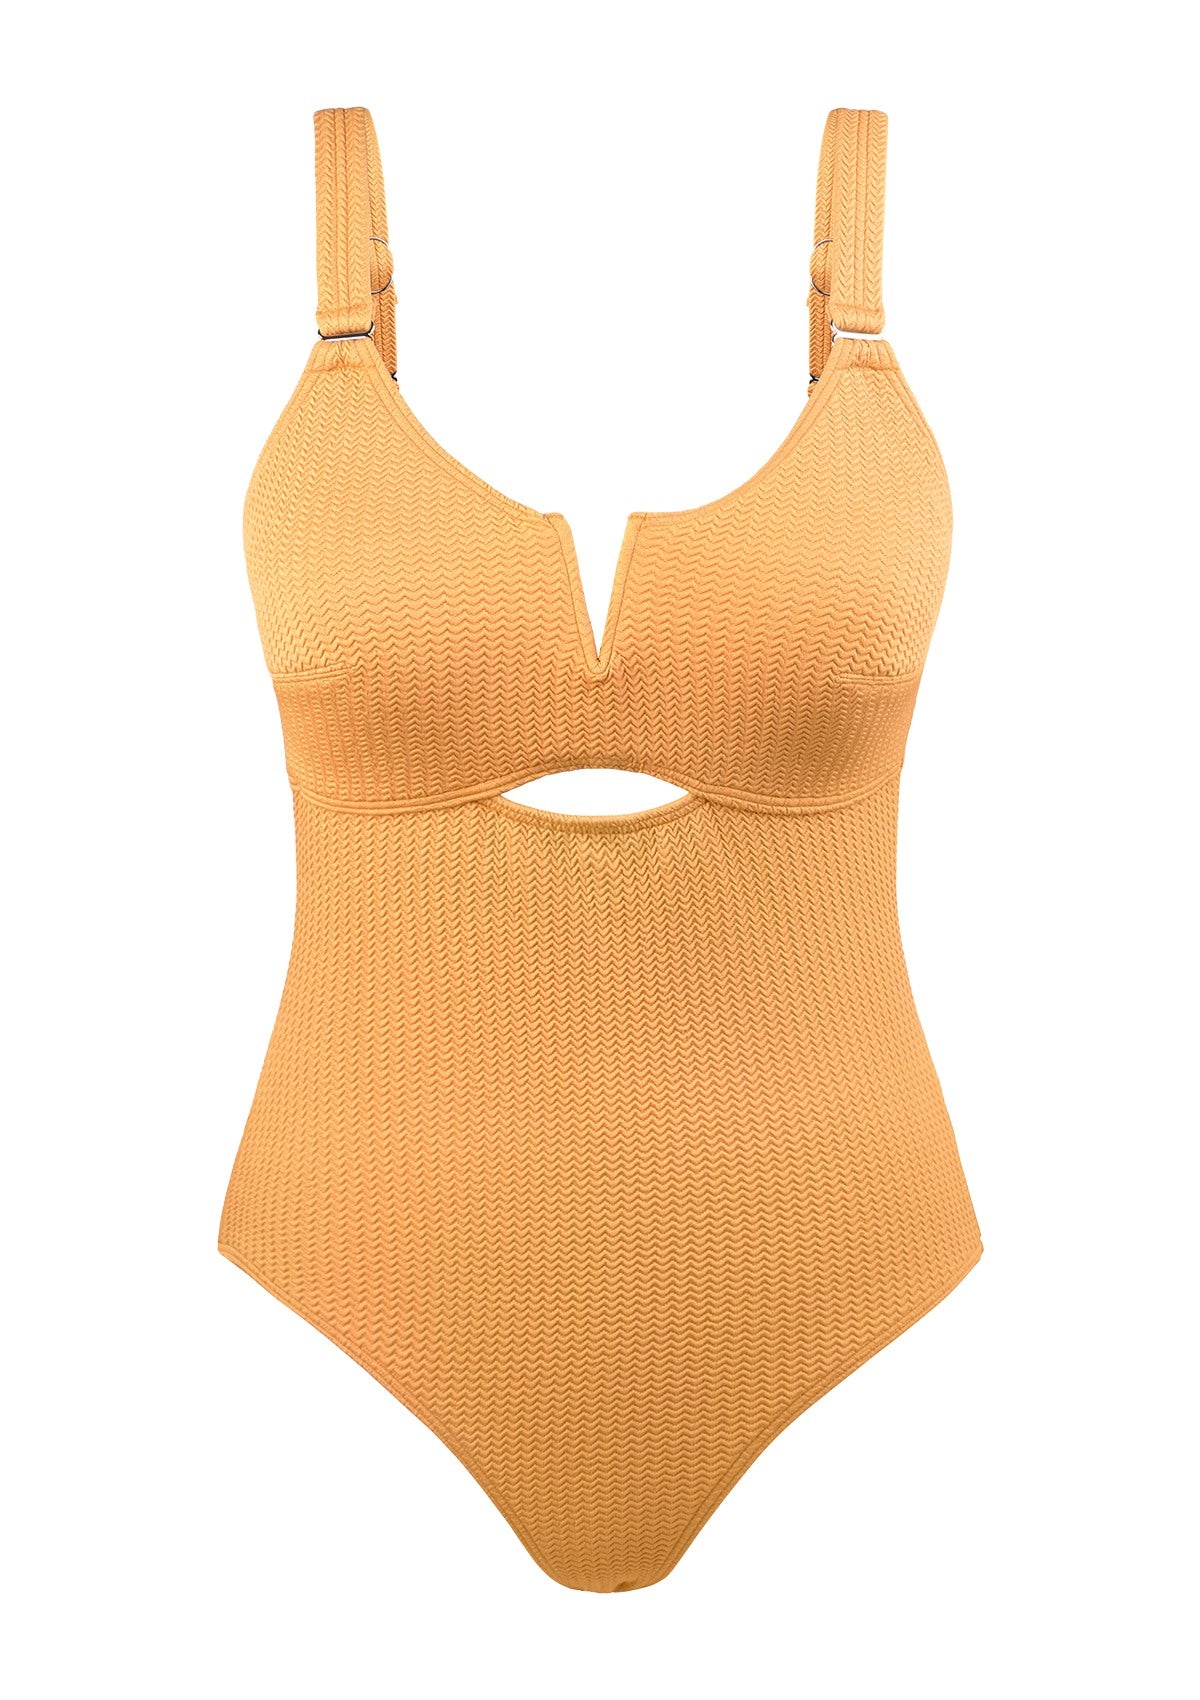 V-wire Plunge Textured One-piece Cutout Swimsuit - 3XL / Peachy Sunrise